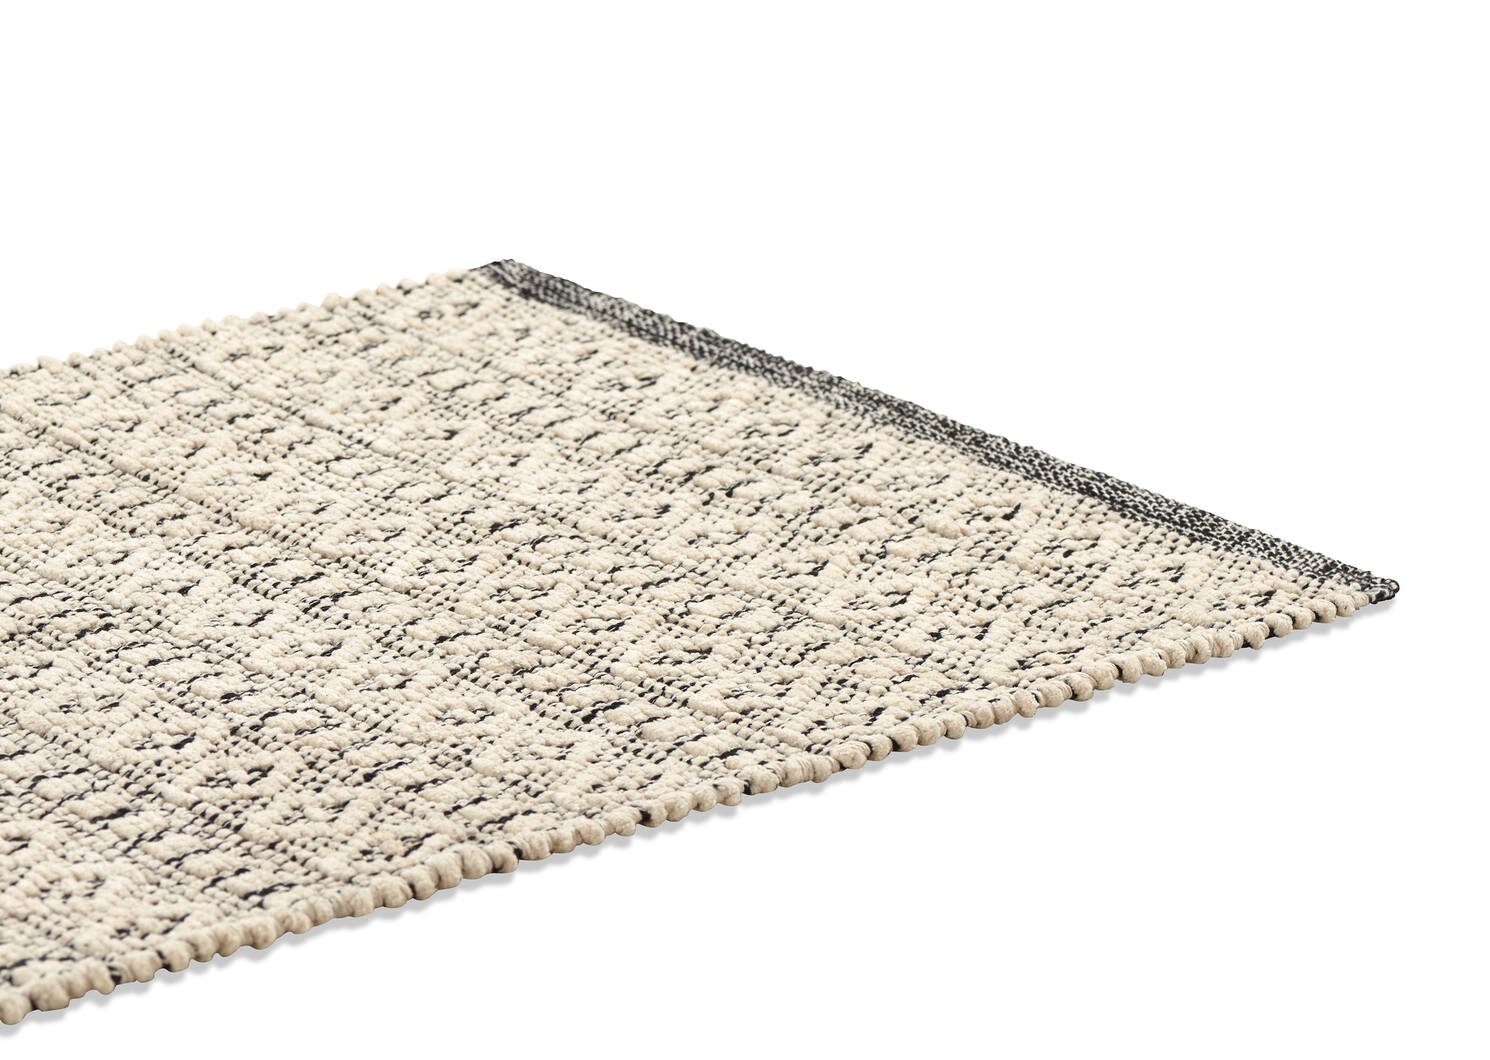 Javier Accent Rugs Natural/Black